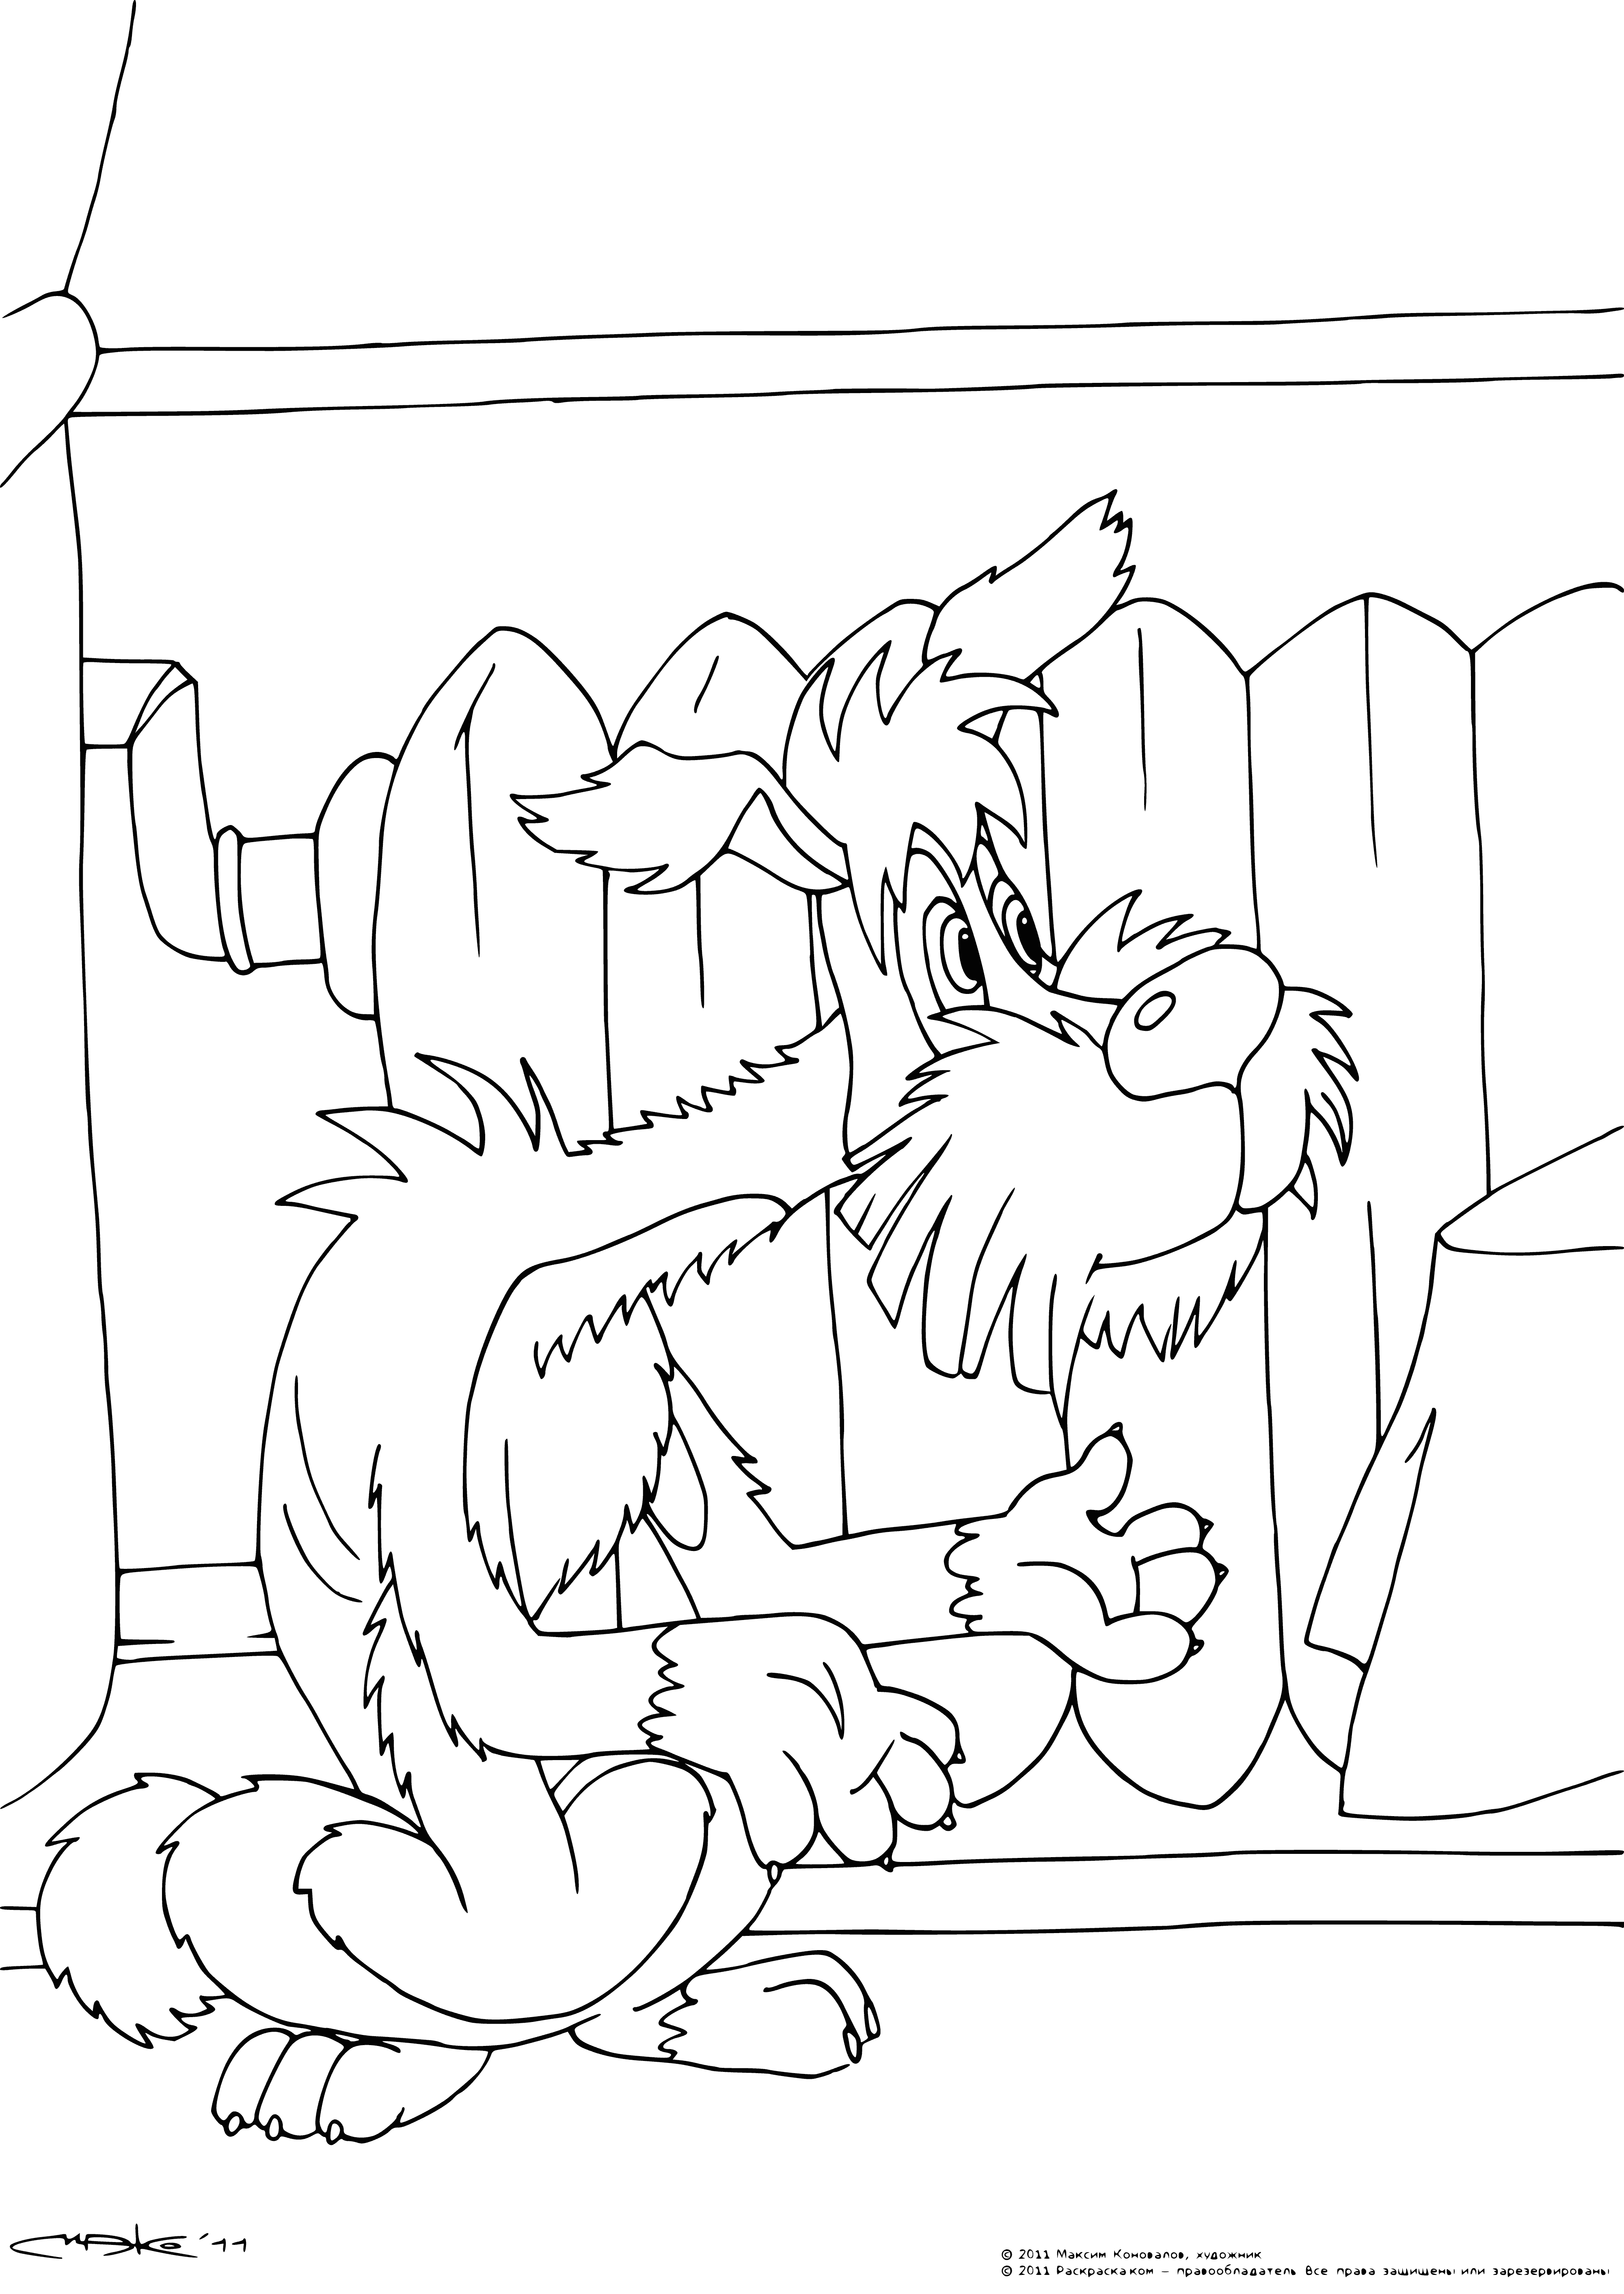 coloring page: Large dog & small dog without paws share coloring page; Big pup looks after little one without limbs. #CaringAnimals